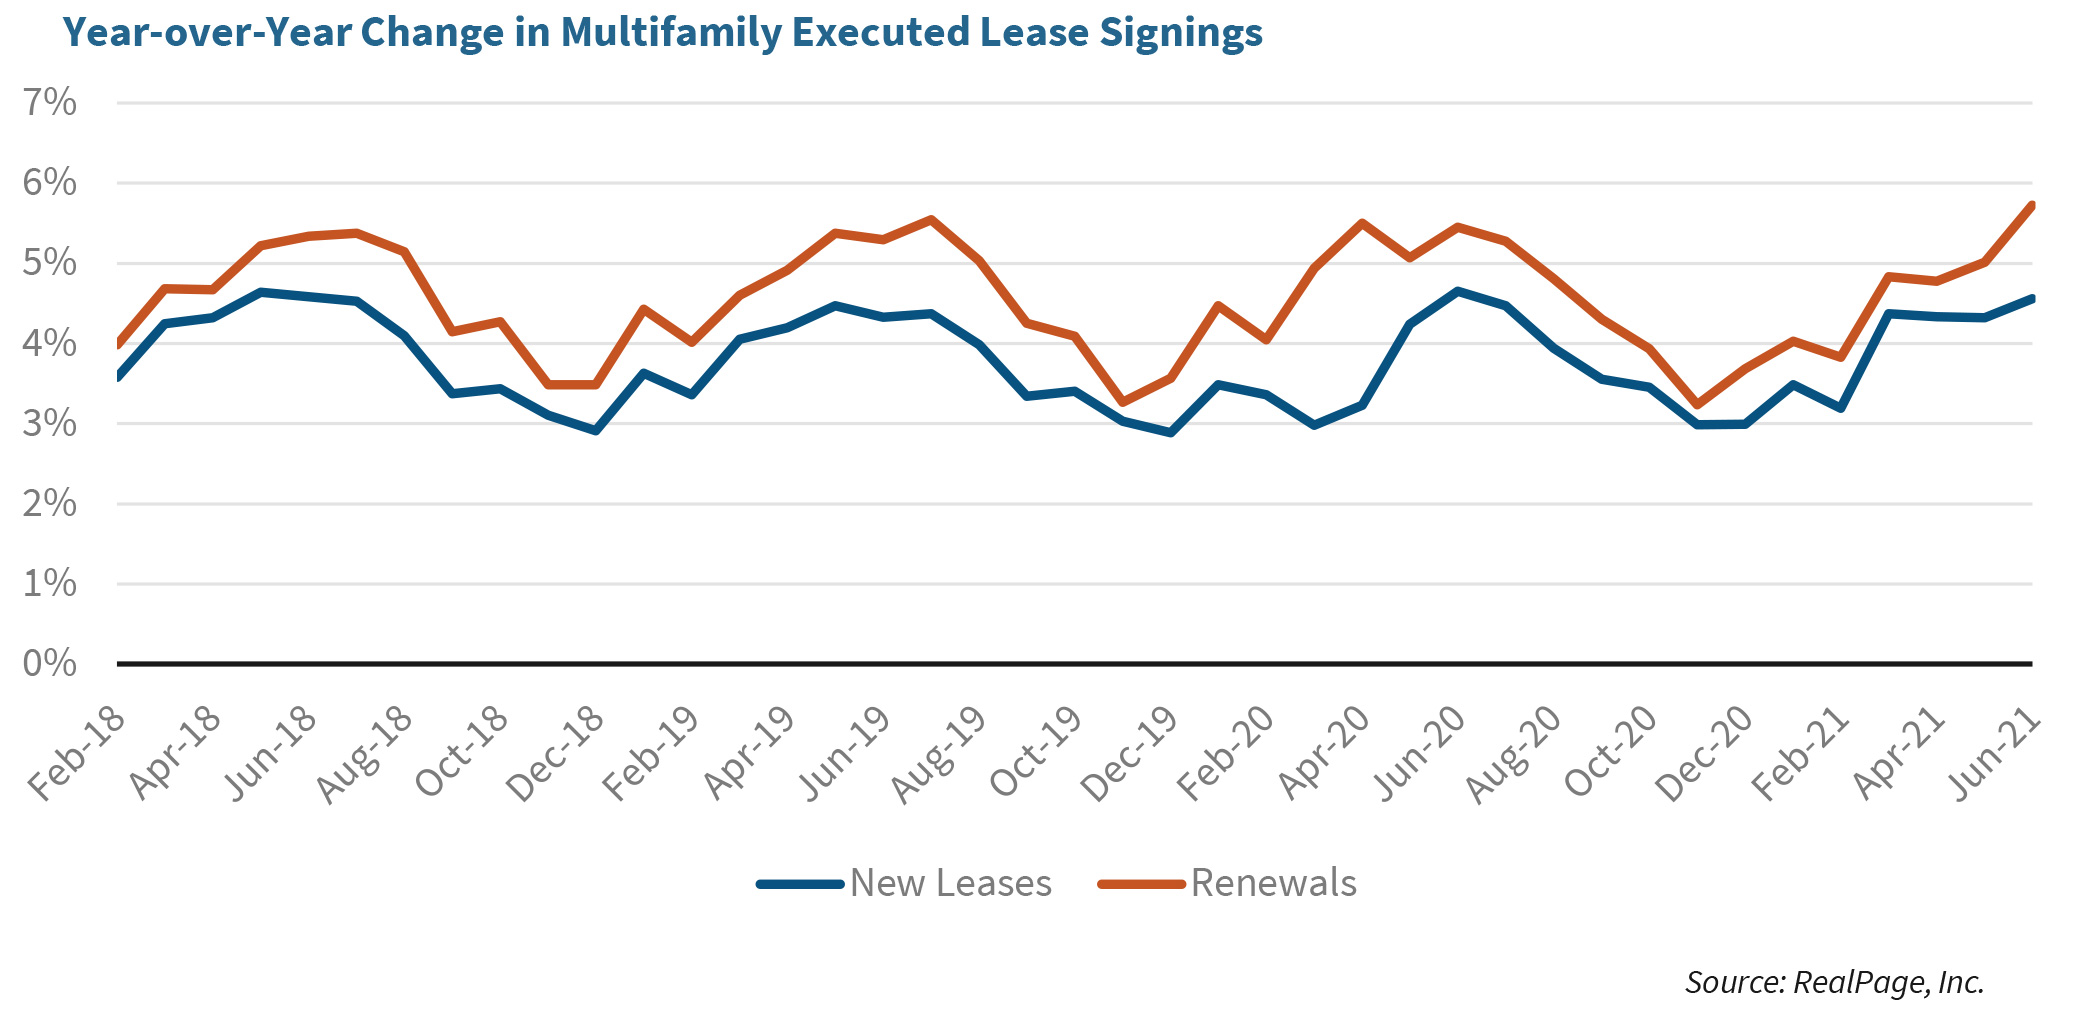 Year-over-Year Change in Multifamily Executed Lease Signings